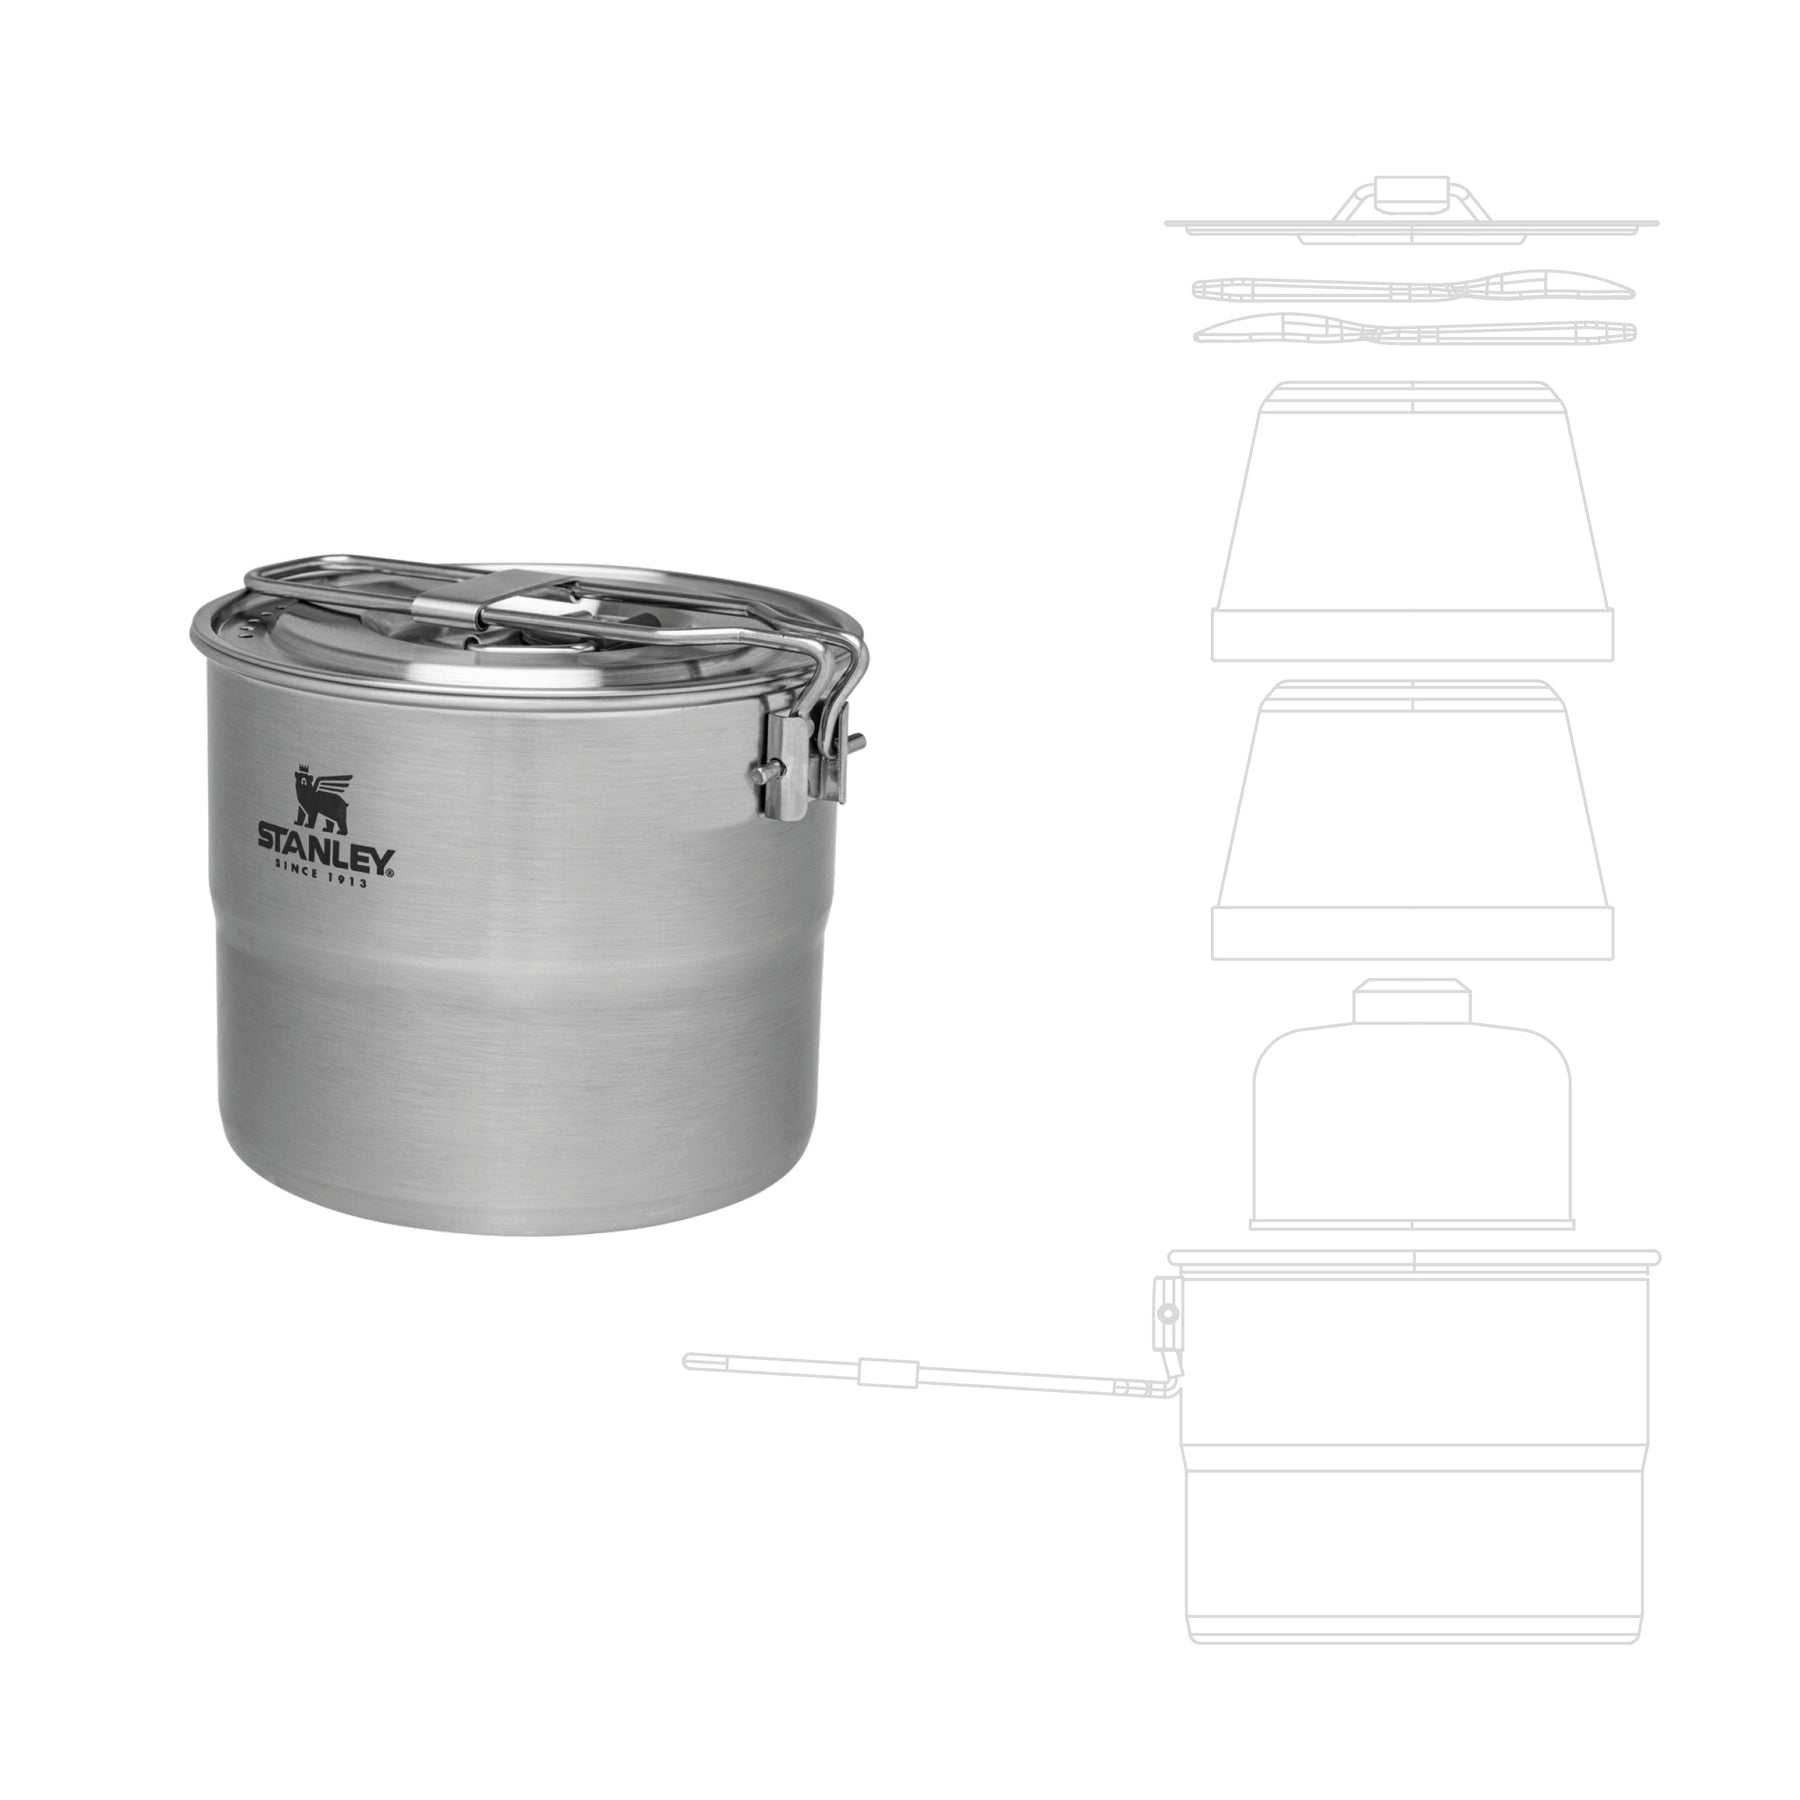 Adventure Stainless Steel Cook Set For Two, 1.1 QT